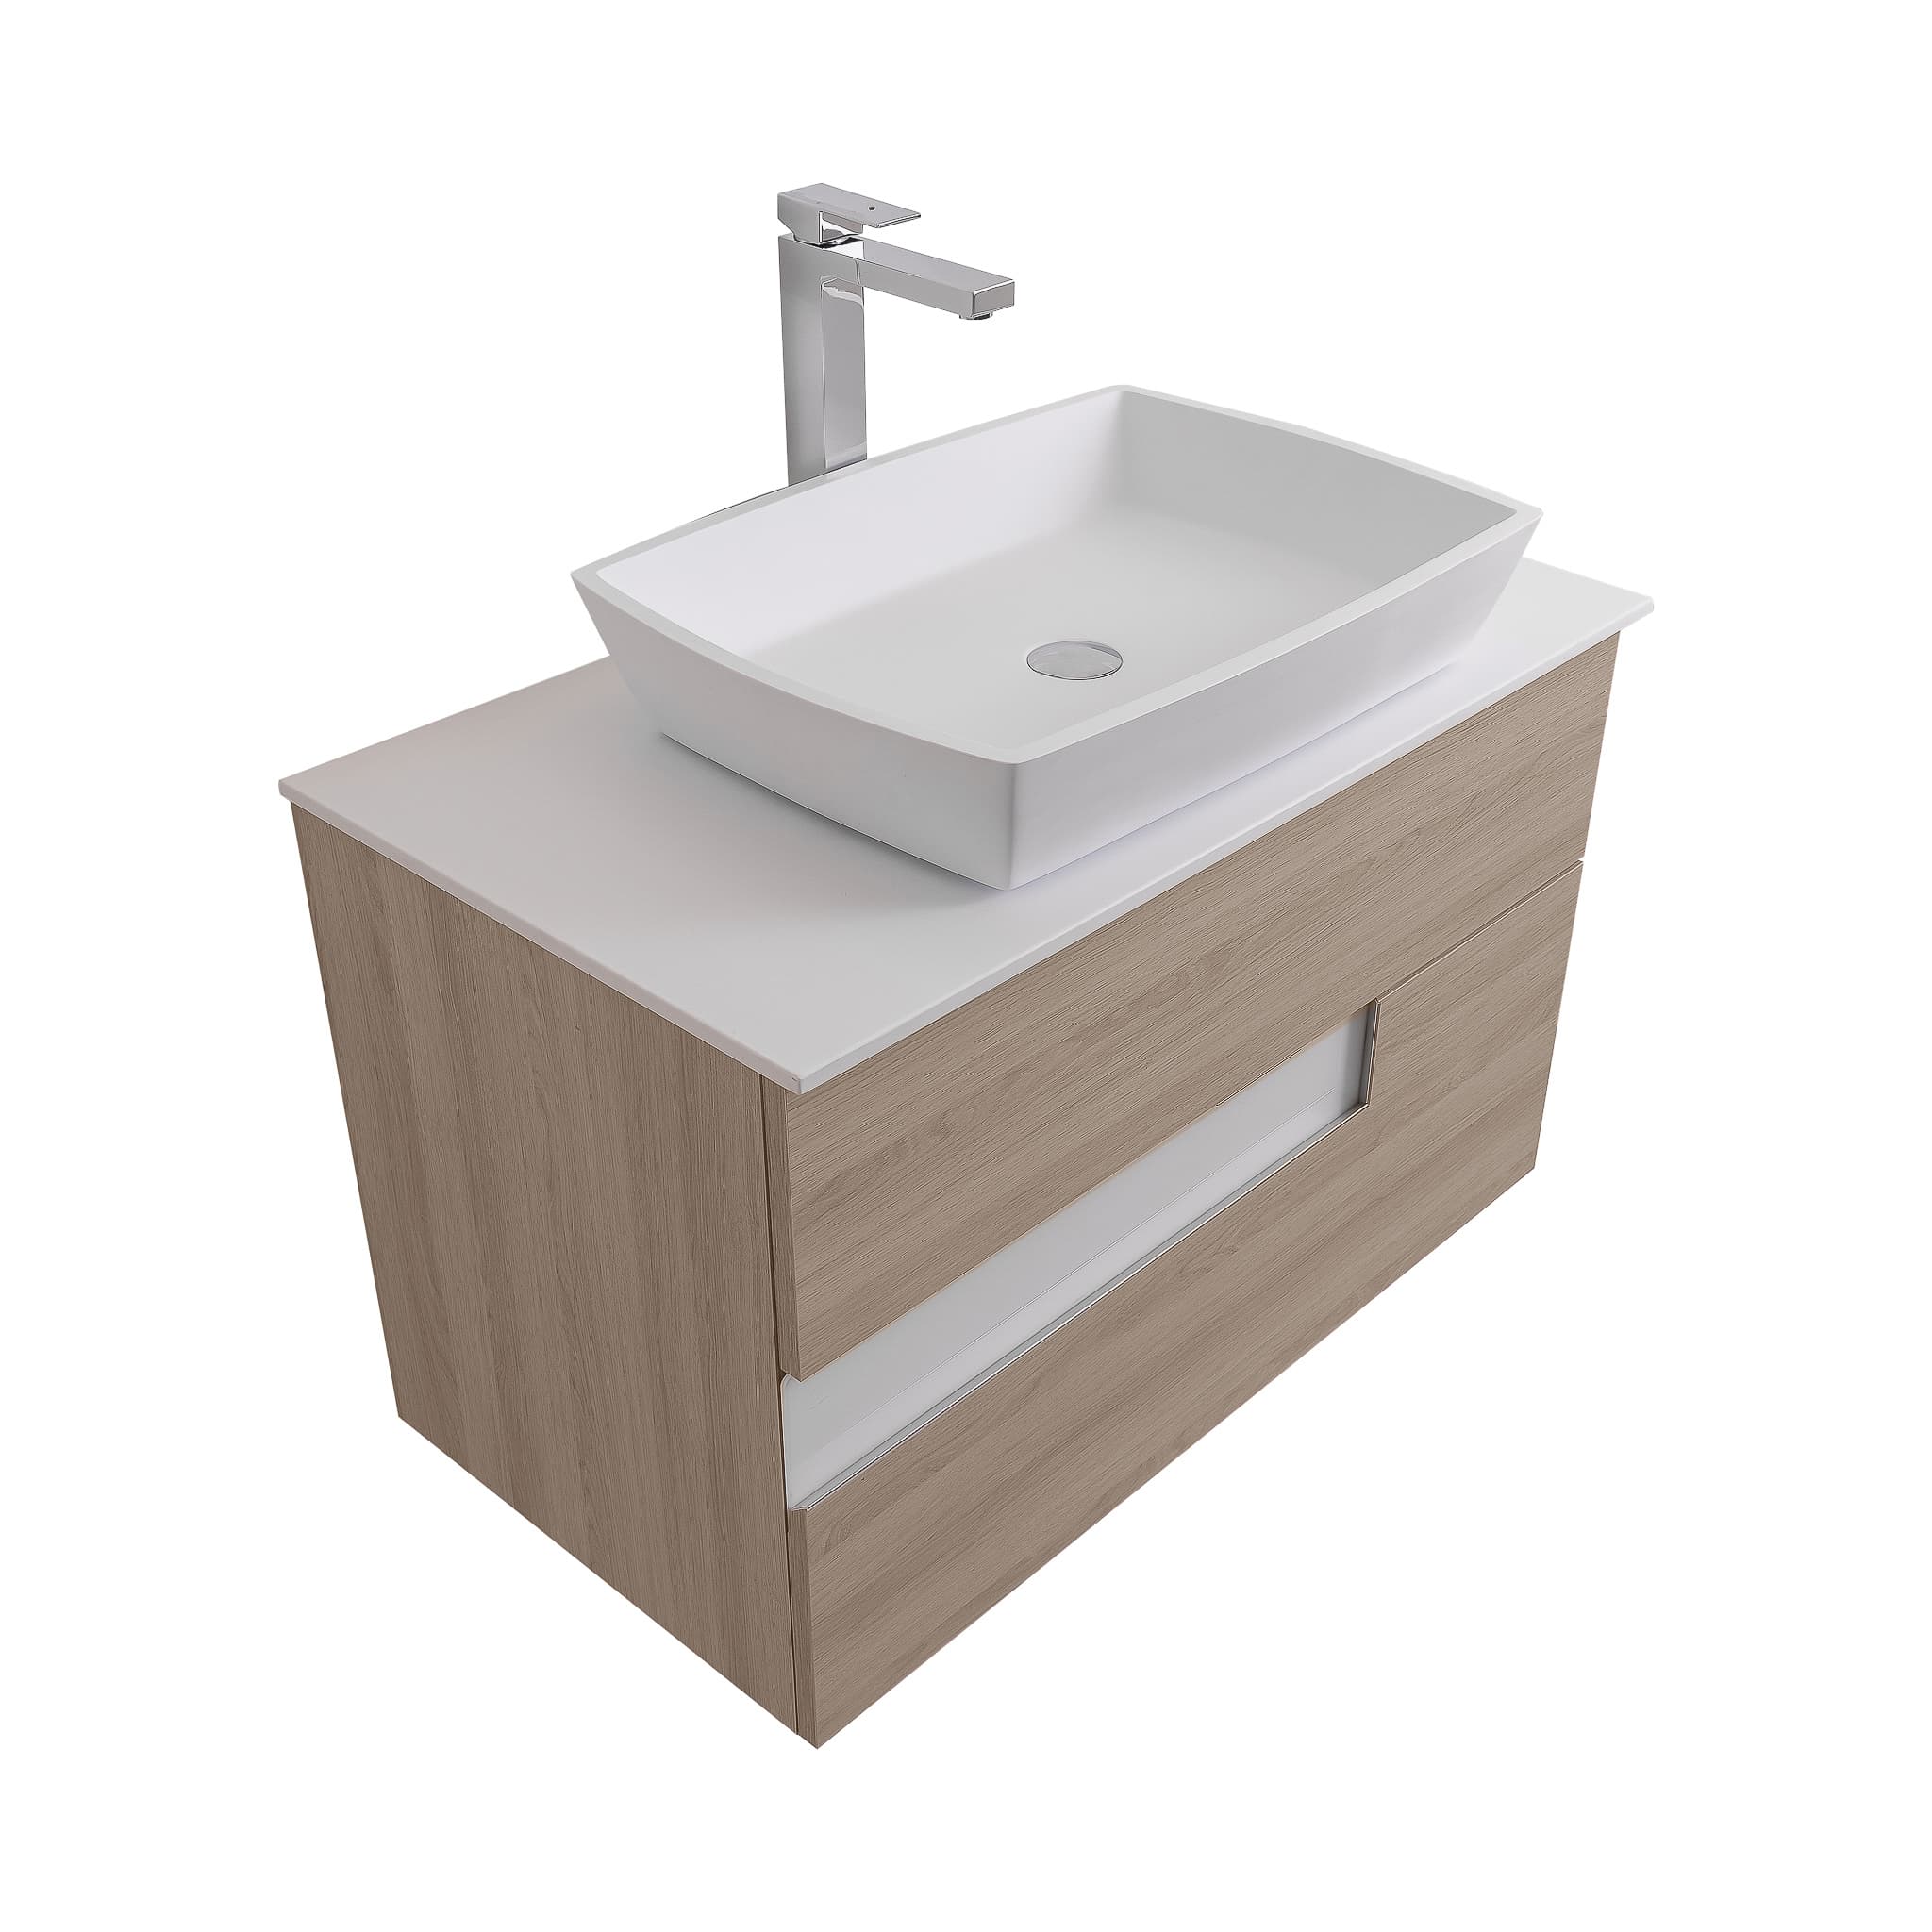 Vision 31.5 Natural Light Wood Cabinet, Solid Surface Flat White Counter And Square Solid Surface White Basin 1316, Wall Mounted Modern Vanity Set